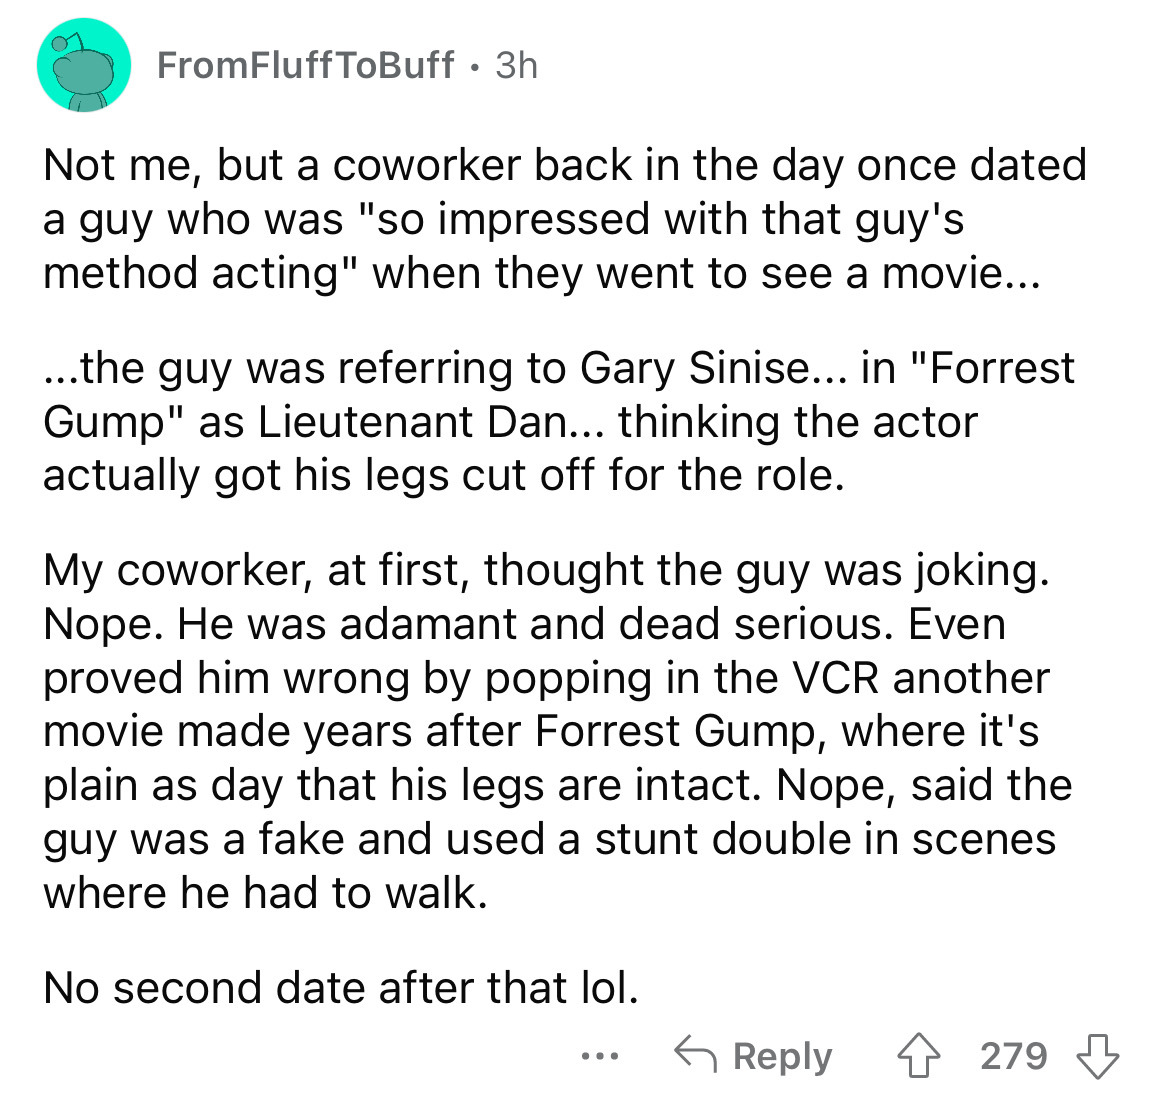 angle - FromFluff ToBuff. 3h Not me, but a coworker back in the day once dated a guy who was "so impressed with that guy's method acting" when they went to see a movie... ...the guy was referring to Gary Sinise... in "Forrest Gump" as Lieutenant Dan... th